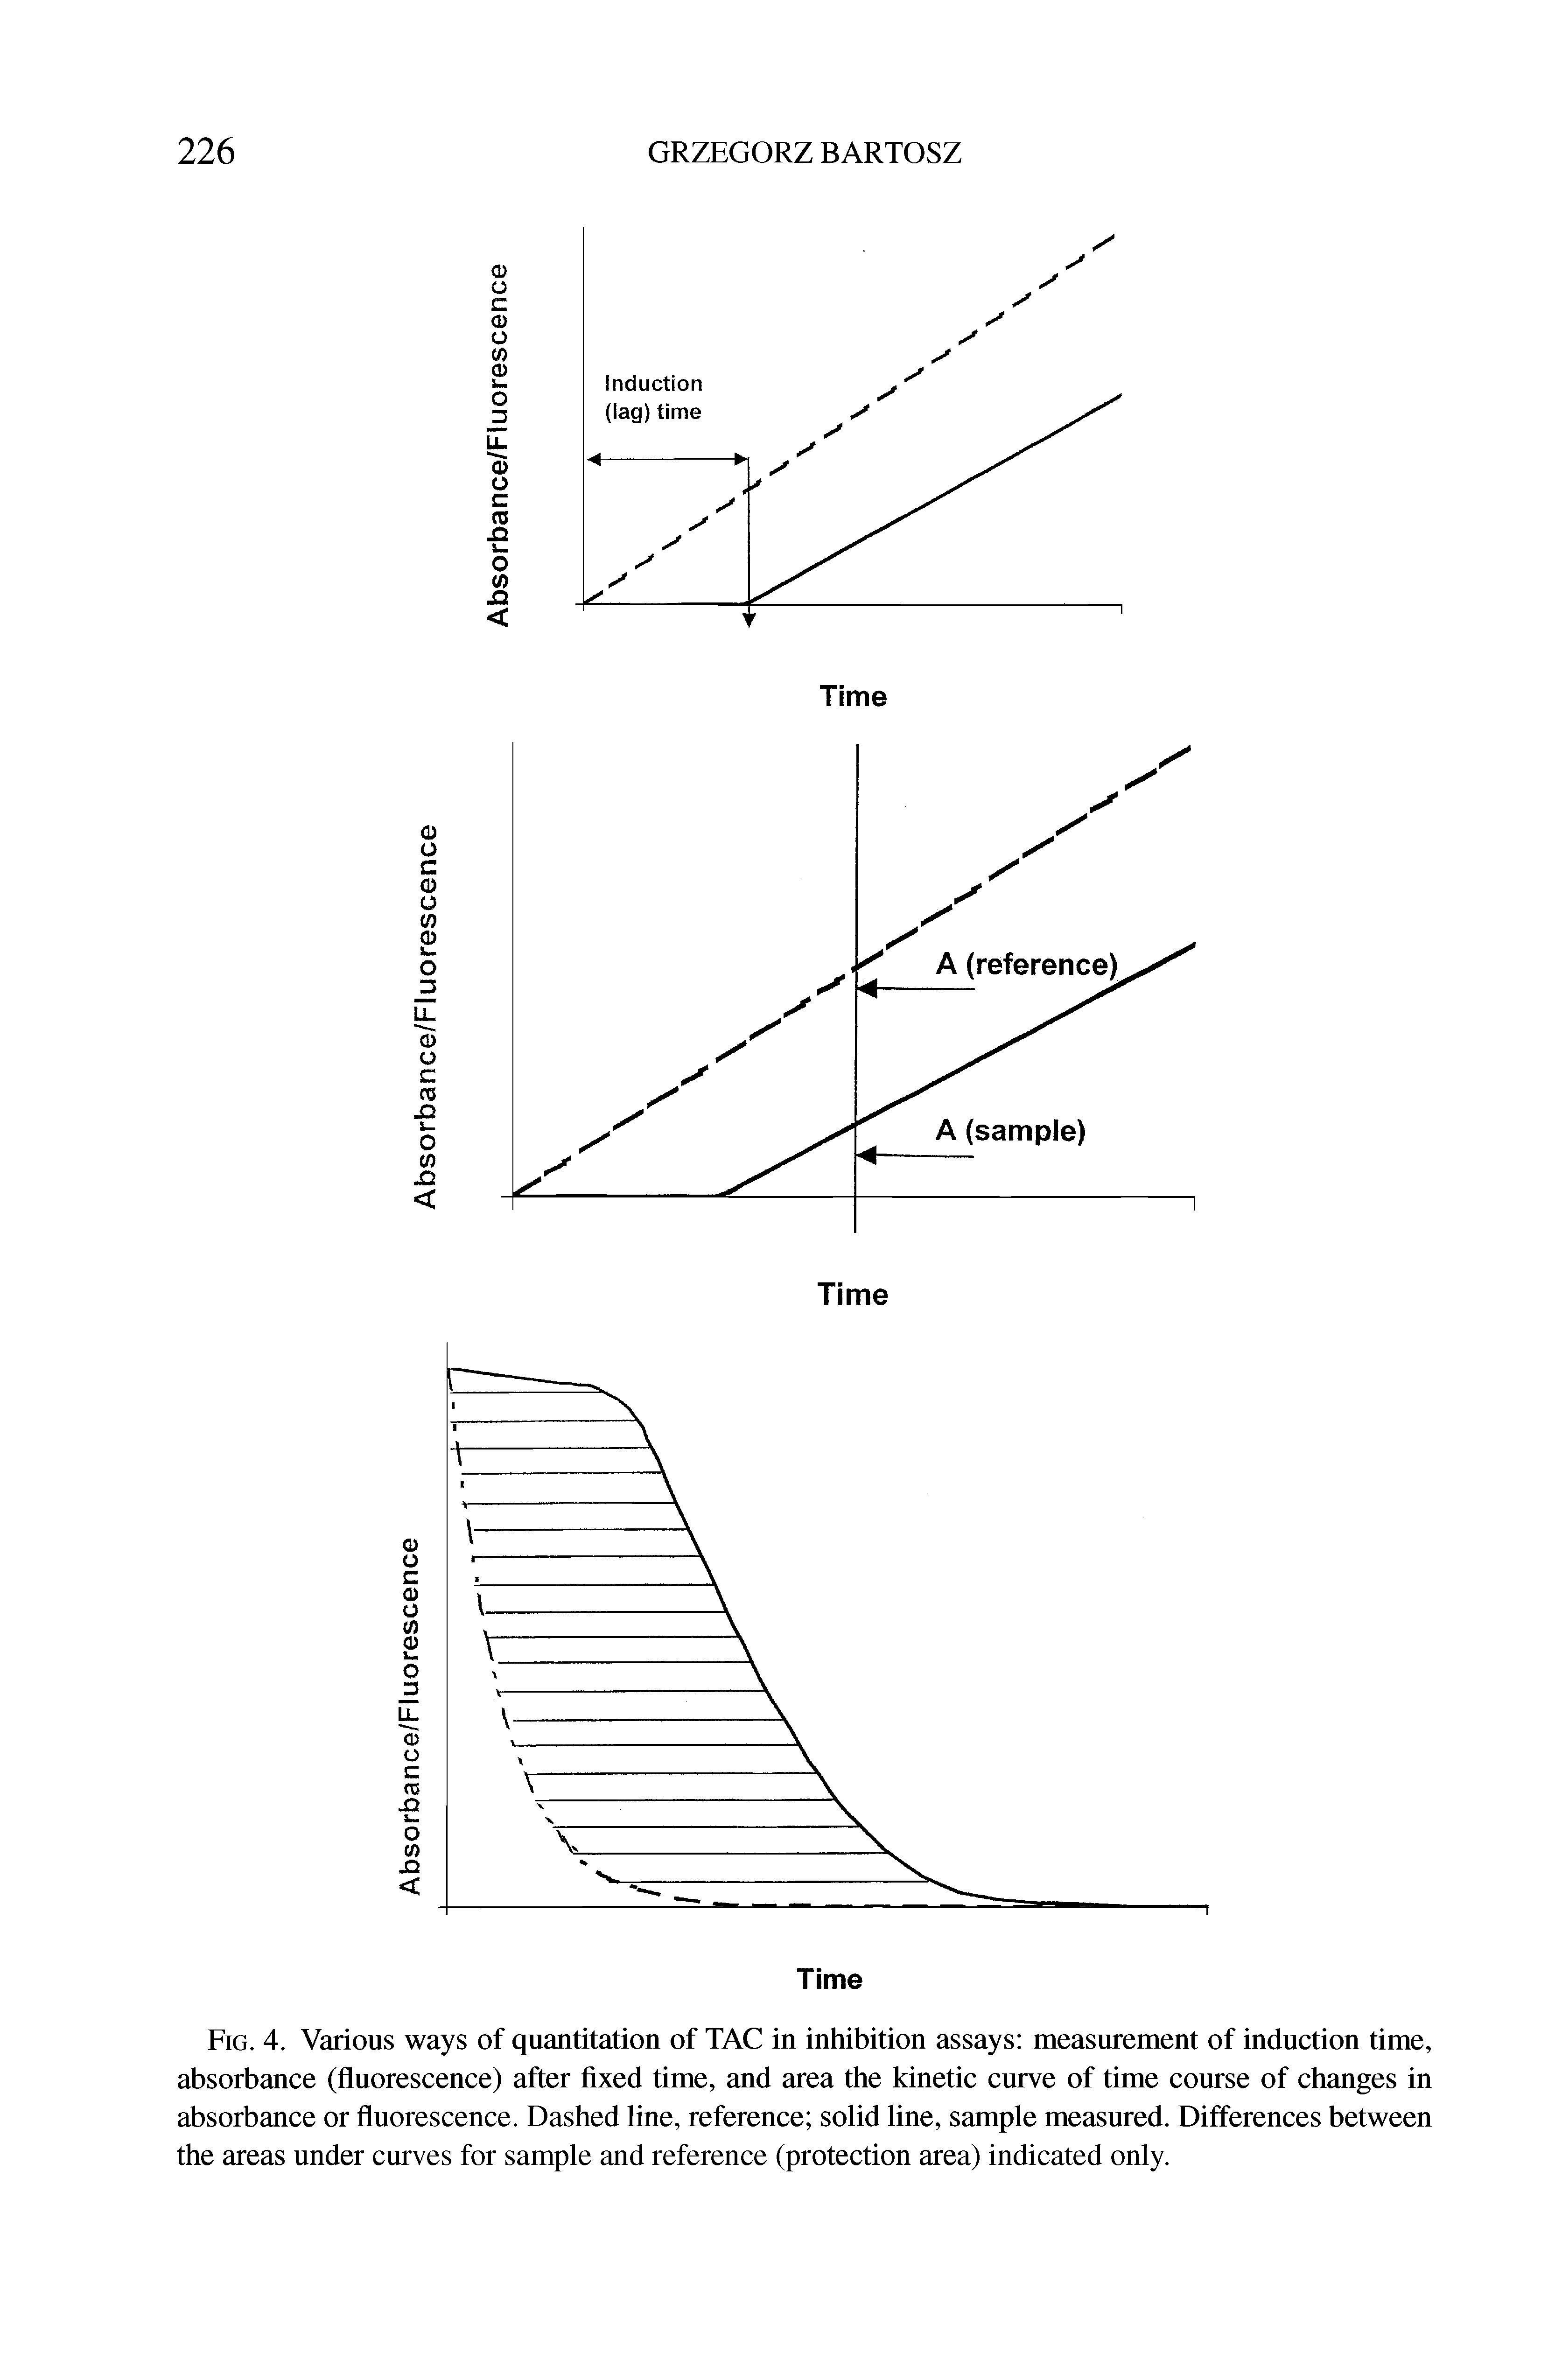 Fig. 4. Various ways of quantitation of TAC in inhibition assays measurement of induction time, absorbance (fluorescence) after fixed time, and area the kinetic curve of time course of changes in absorbance or fluorescence. Dashed line, reference solid line, sample measured. Differences between the areas under curves for sample and reference (protection area) indicated only.